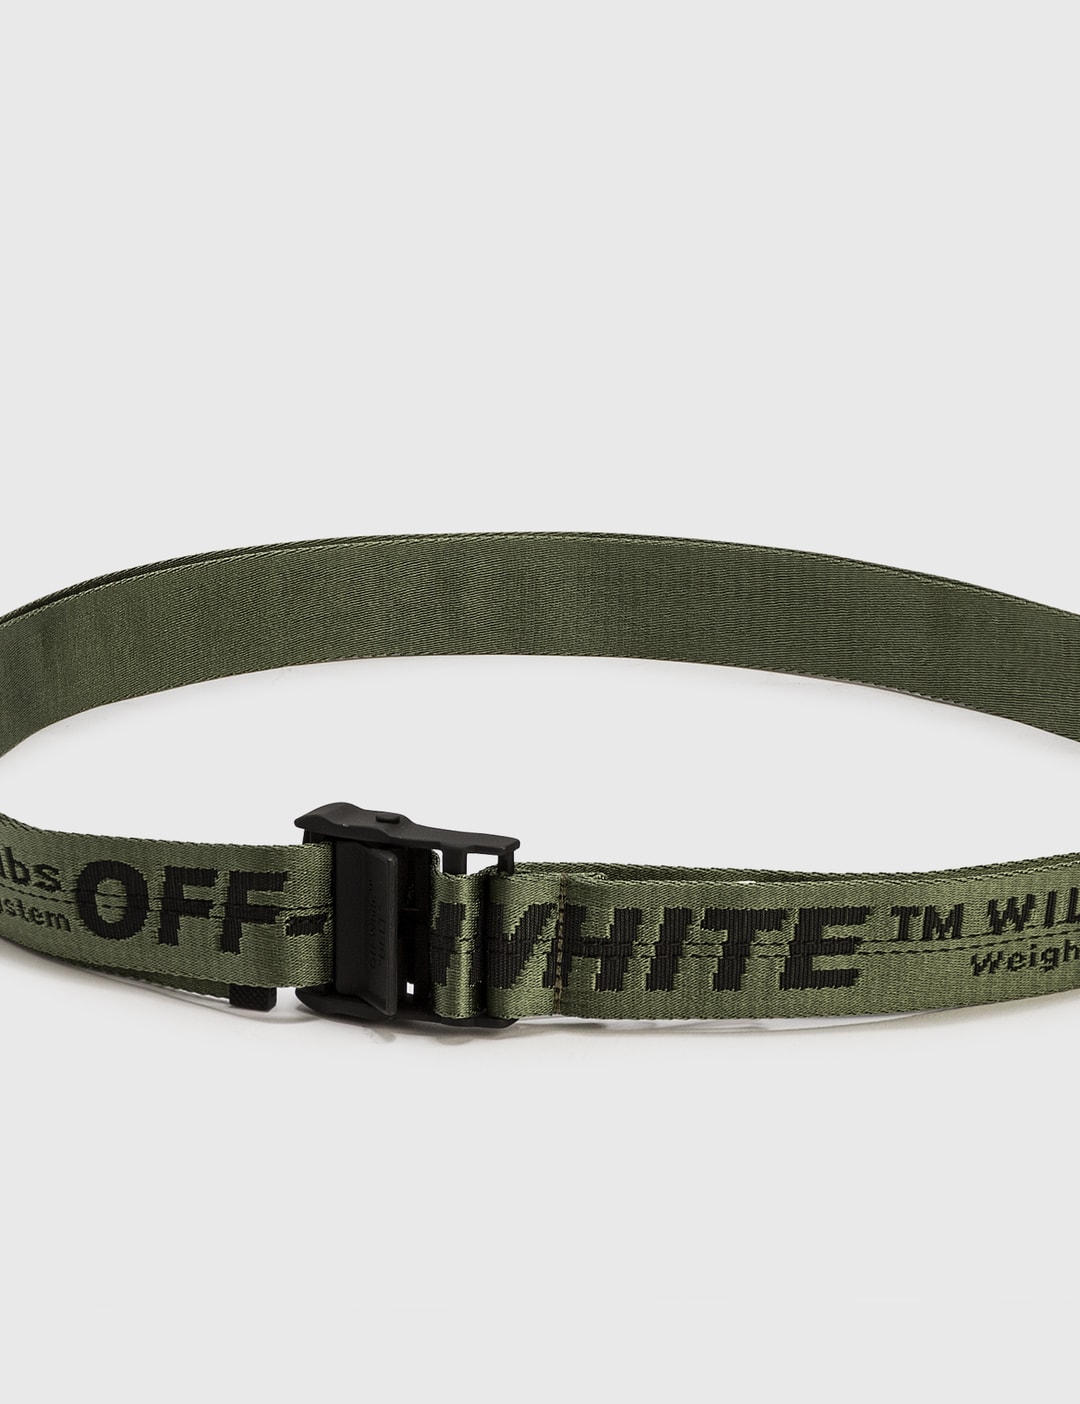 Begrænsninger Afskedige cyklus Off-White | HBX - Globally Curated Fashion and Lifestyle by Hypebeast